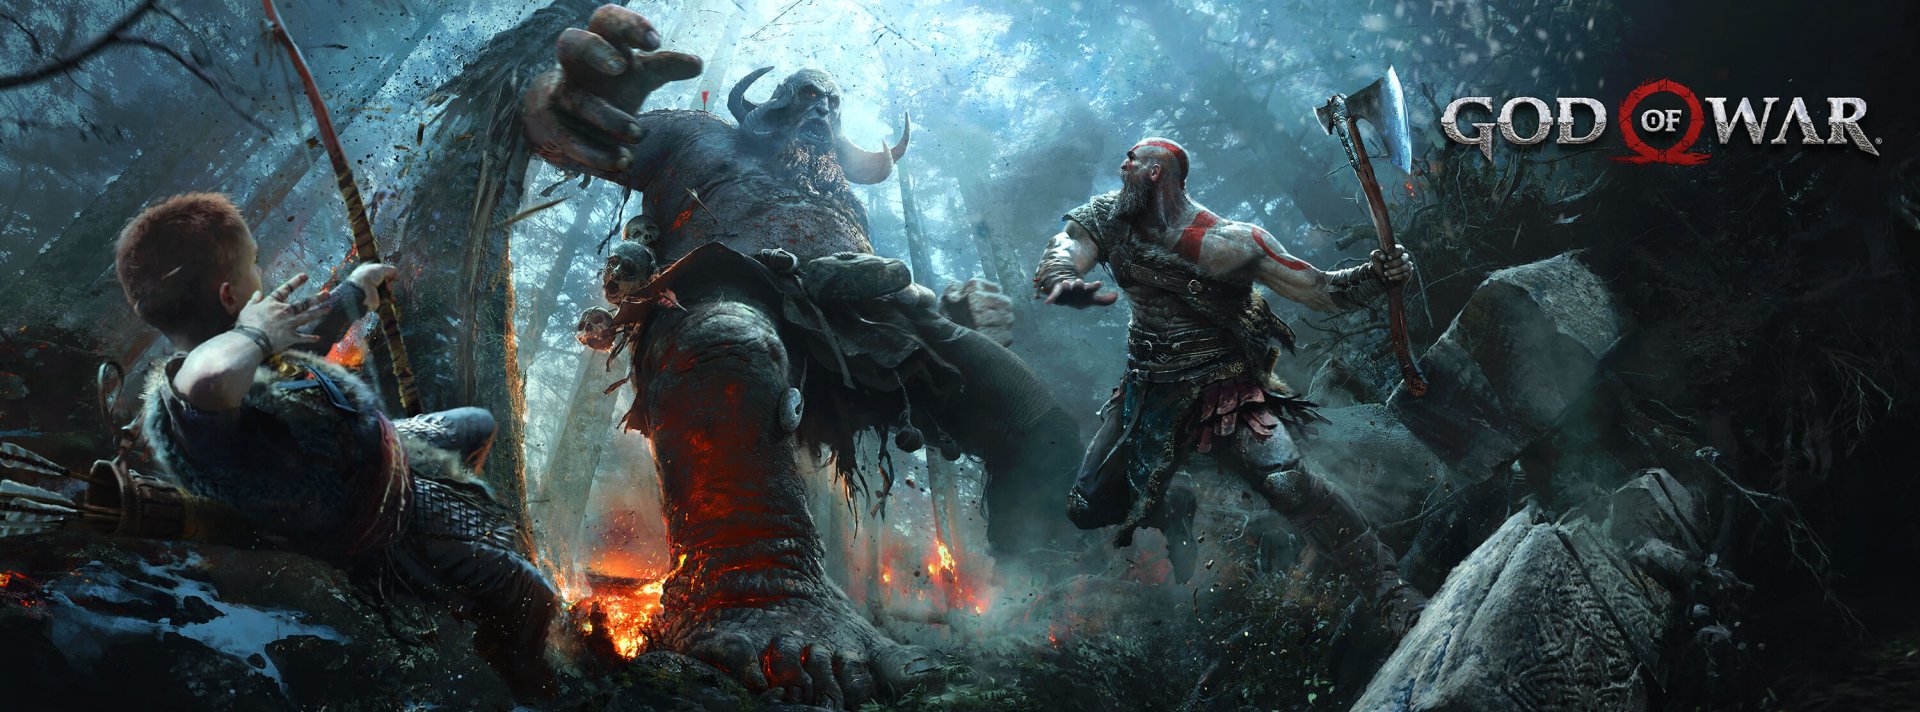 150 God of War 2018 HD Wallpapers Background Images 1920x712